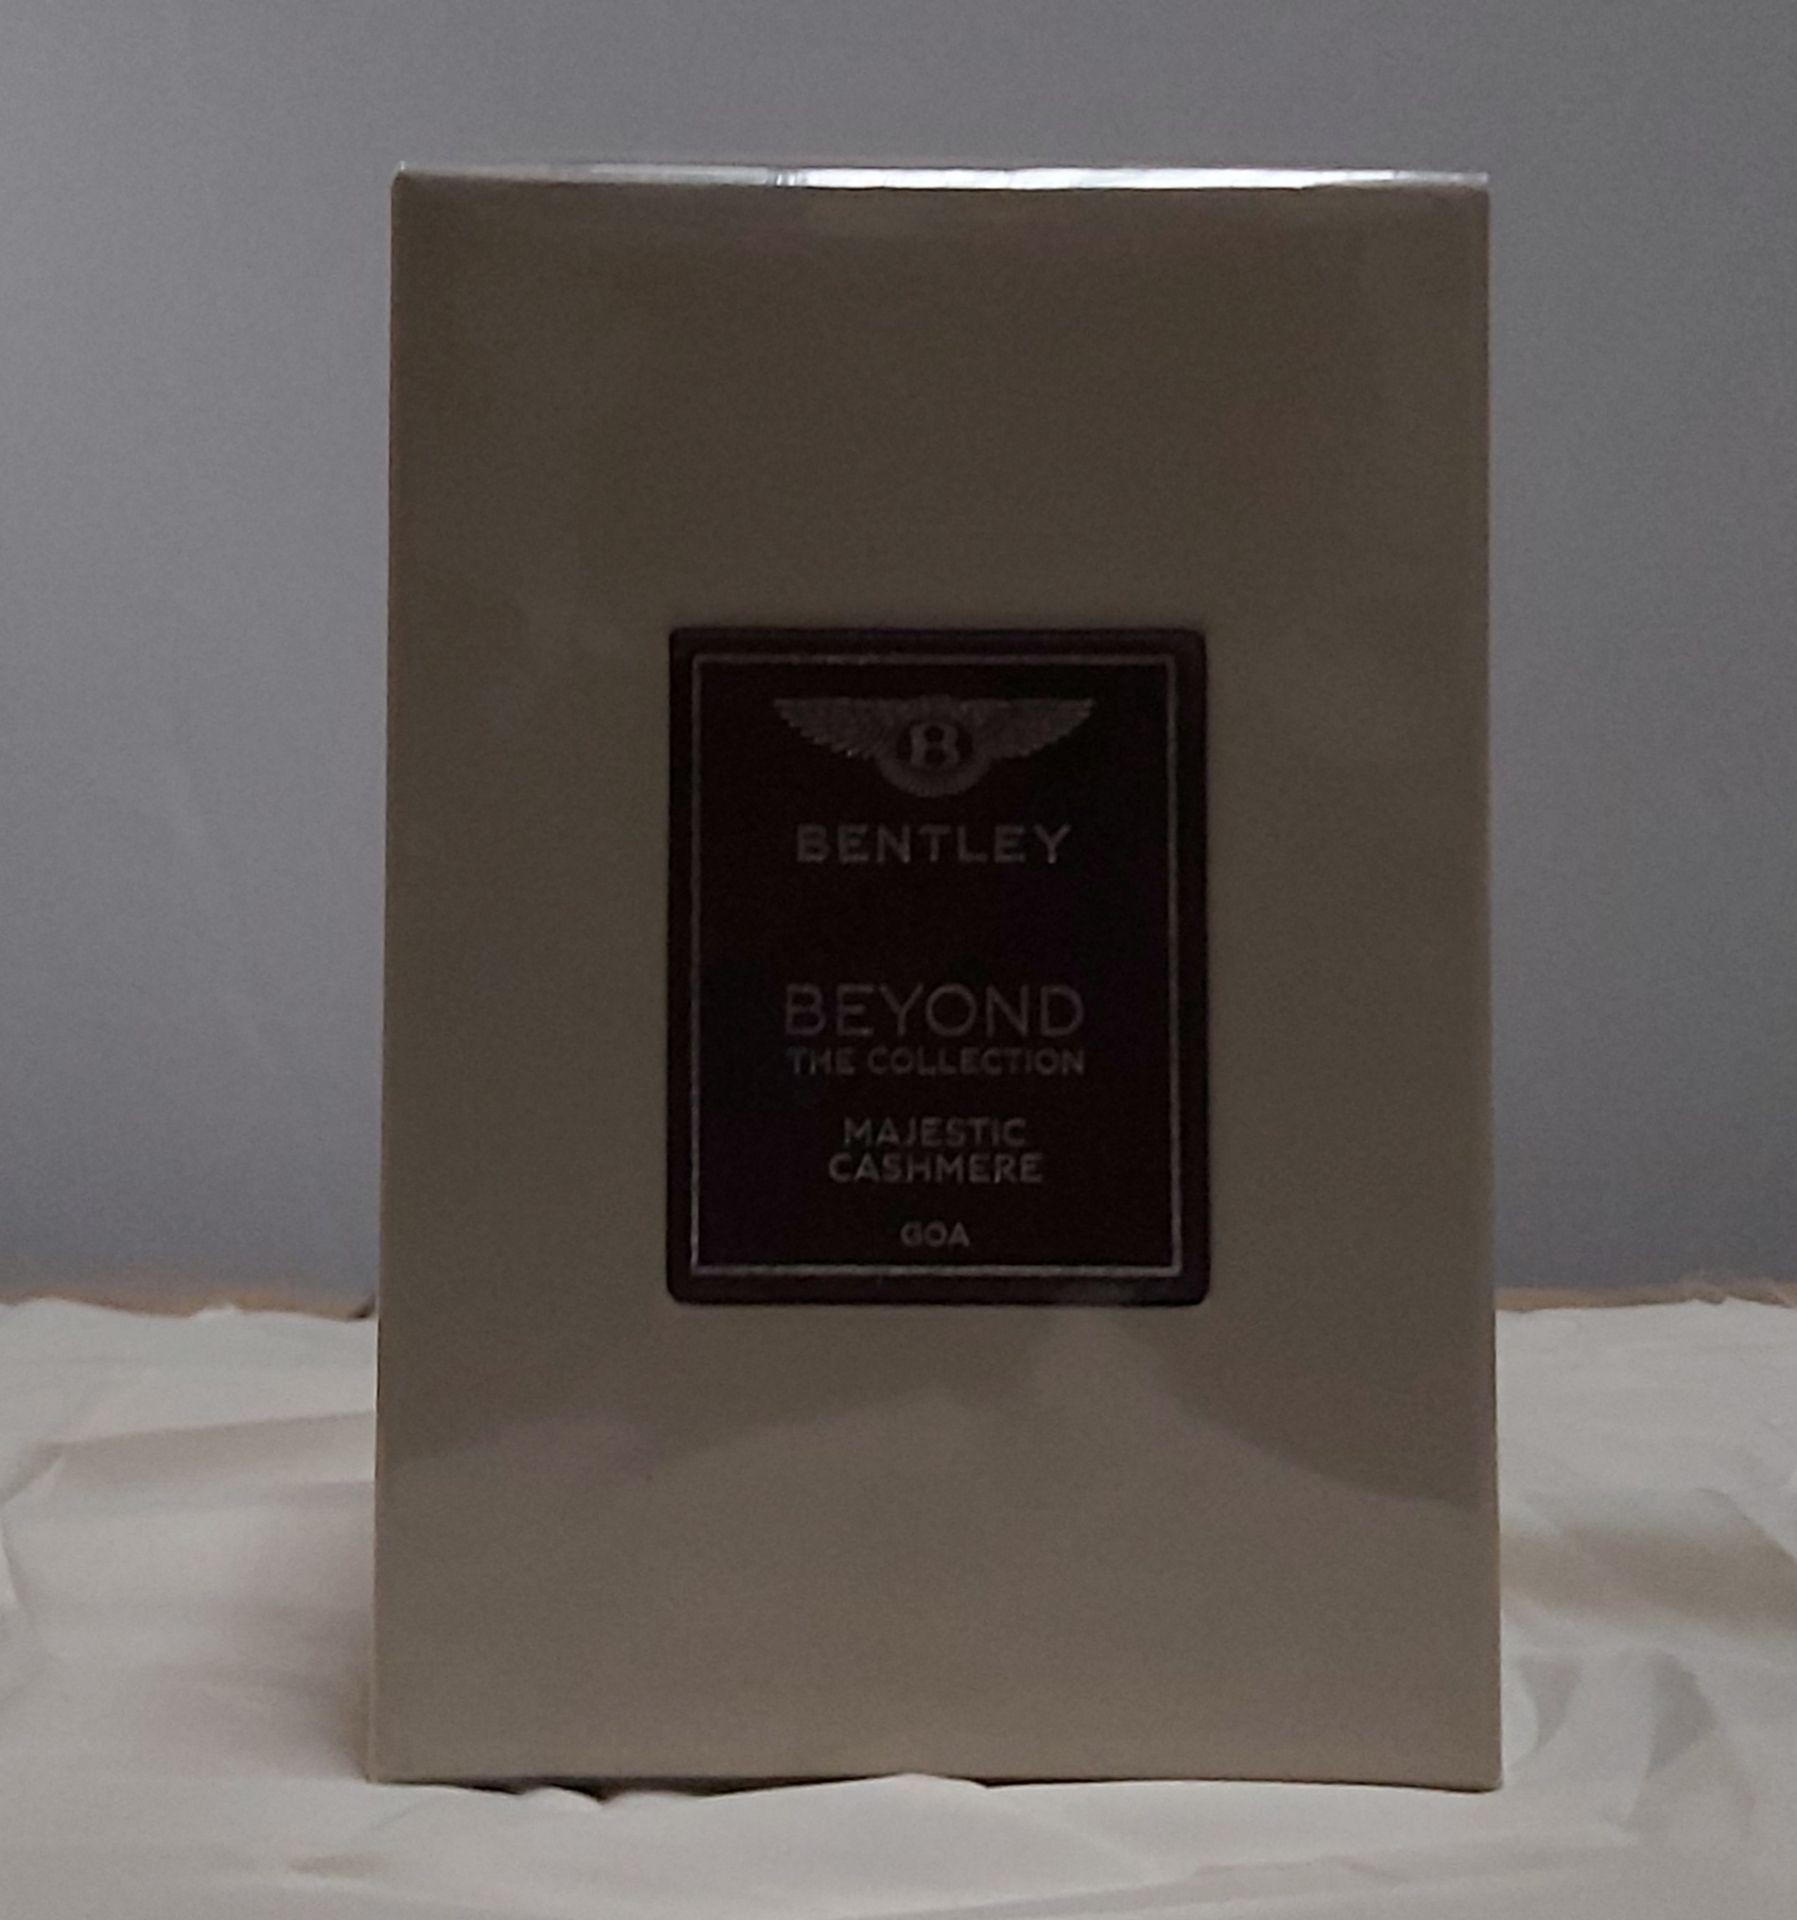 10 x Bentley Beyond The Collection Majestic Cashmere 100ml EDP. Condition New & Sealed. (RRP £1600).